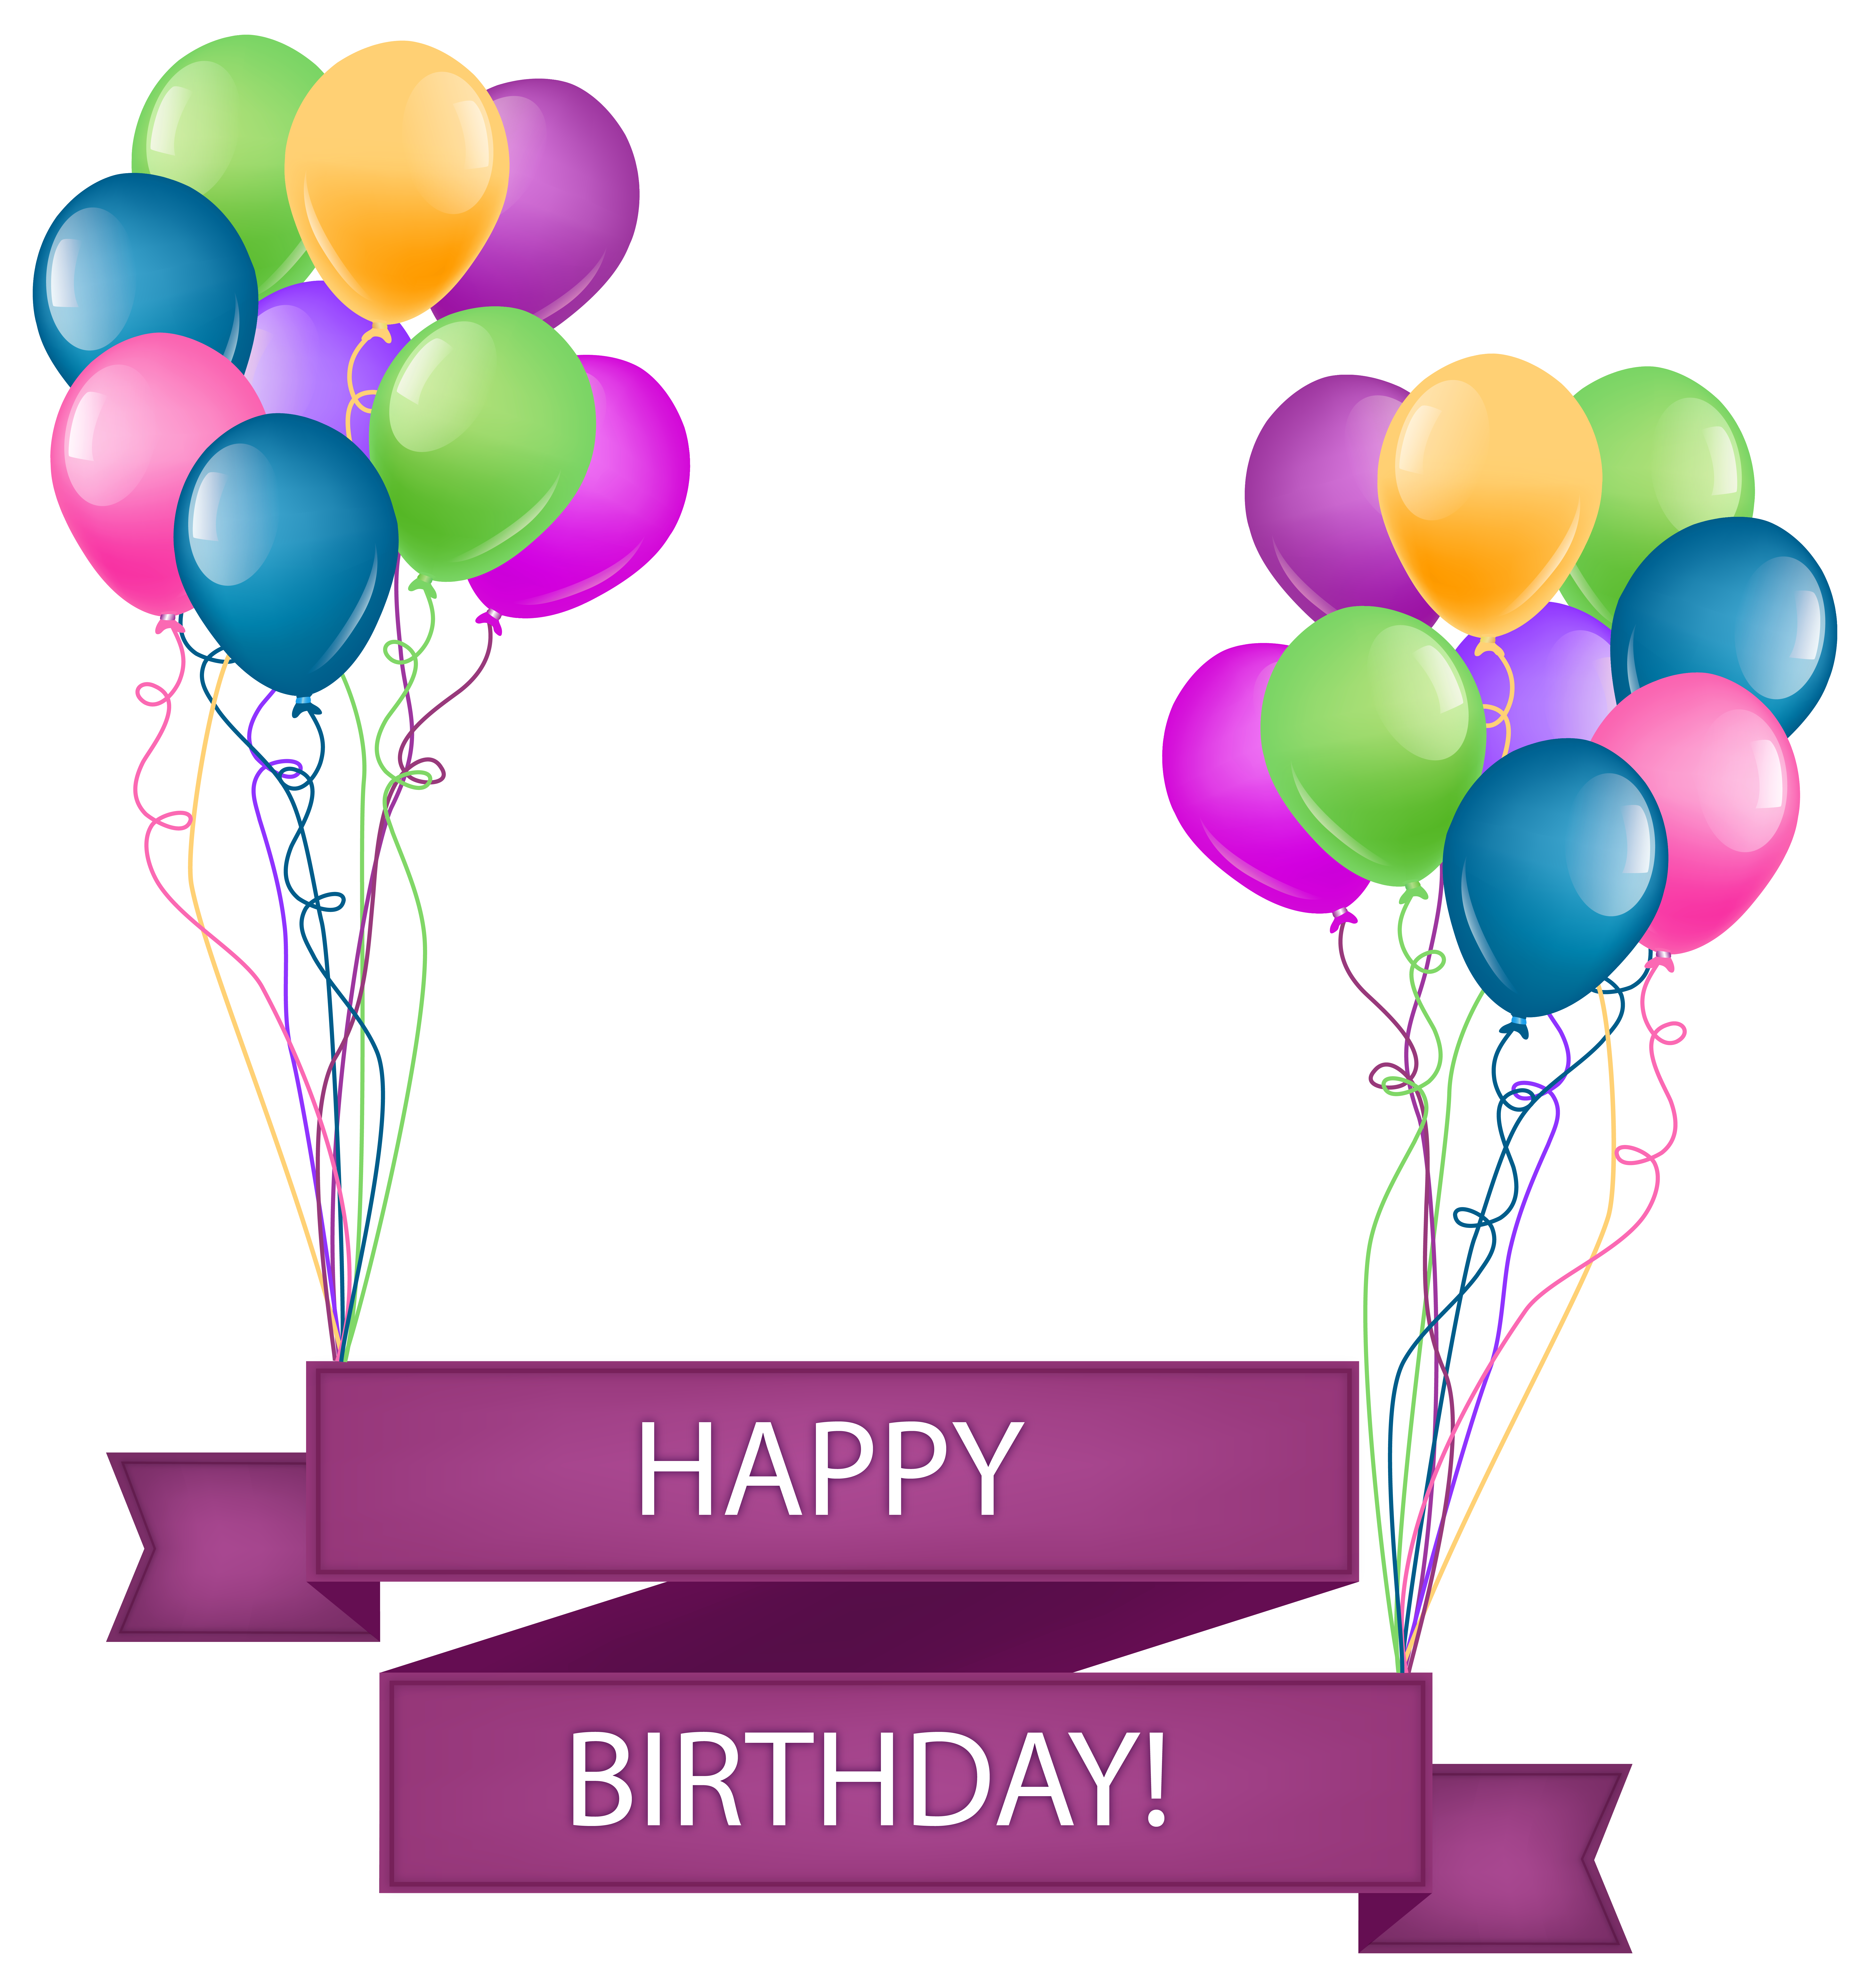 Happy birthday banner with. Anniversary clipart transparent background